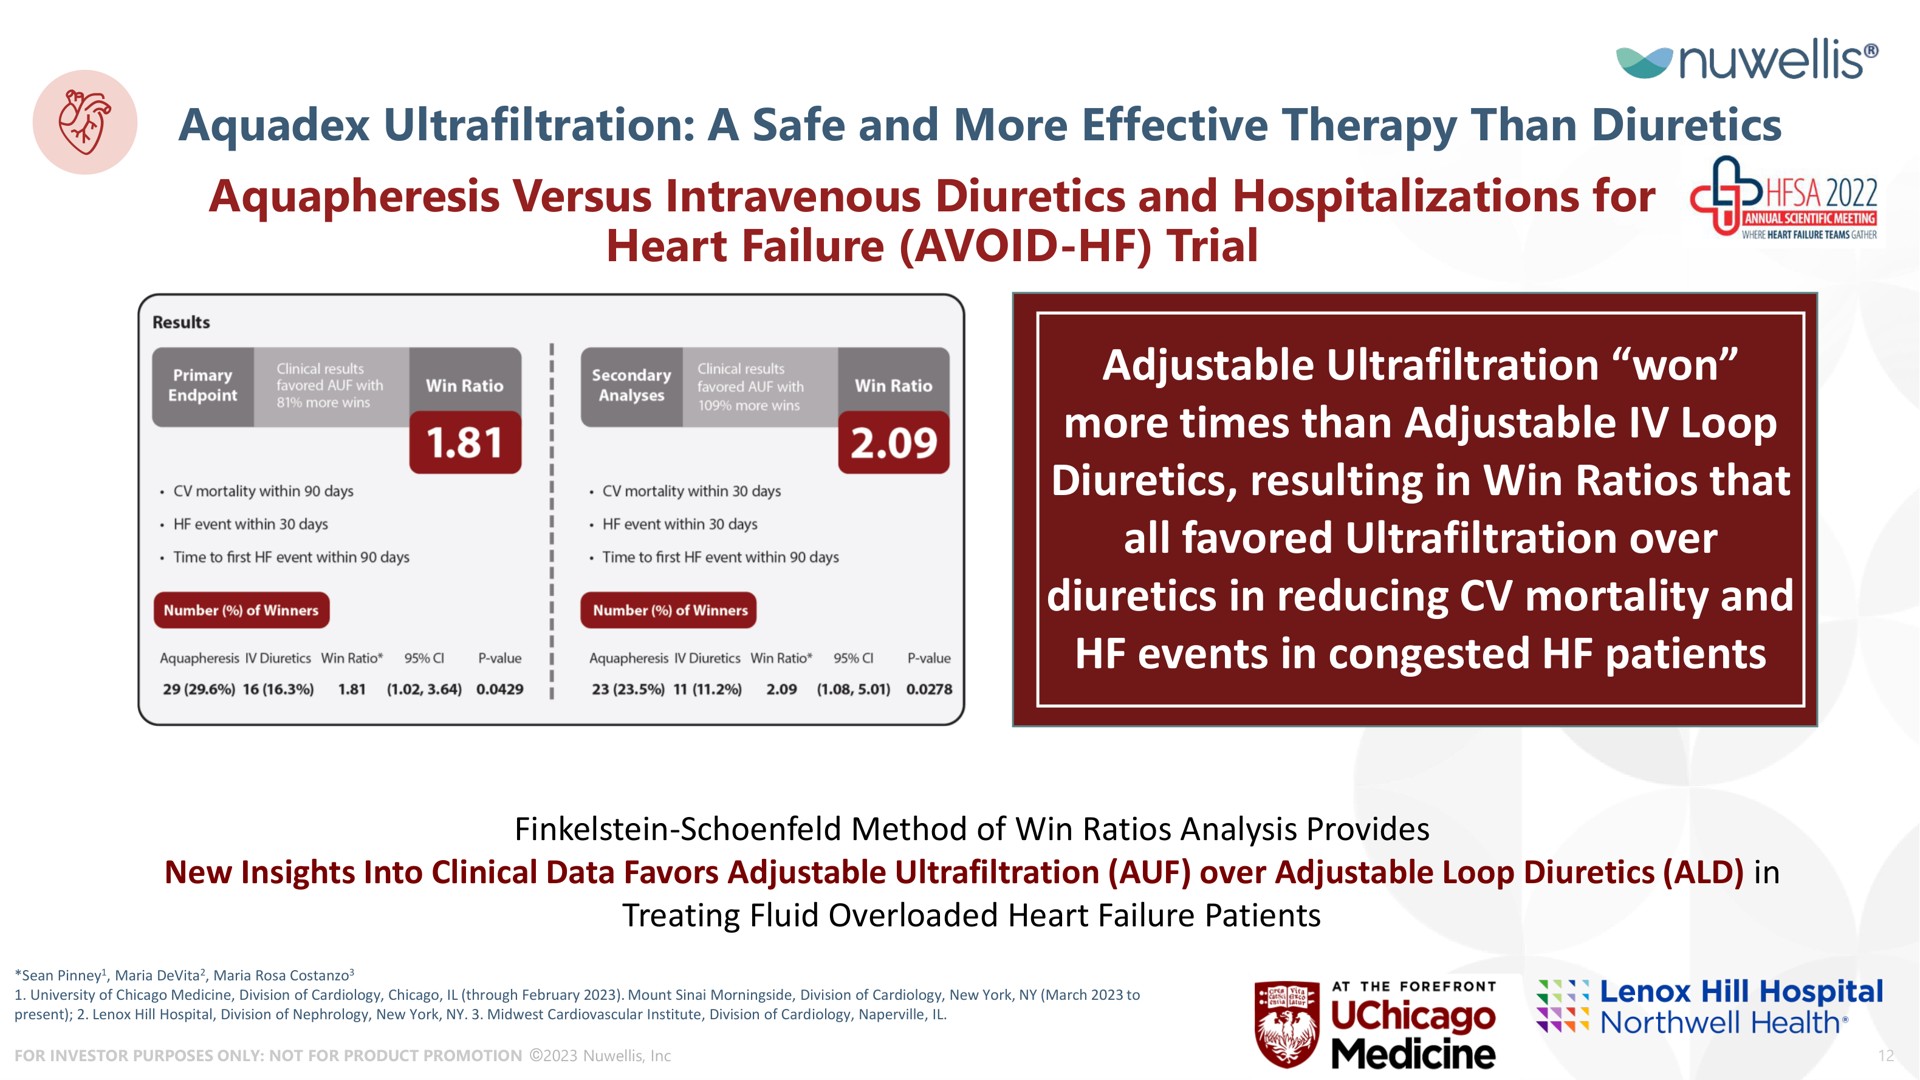 ultrafiltration a safe and more effective therapy than diuretics versus intravenous diuretics and hospitalizations for heart failure avoid trial adjustable ultrafiltration won more times than adjustable loop diuretics resulting in win ratios that all favored ultrafiltration over diuretics in reducing mortality and events in congested patients of venue | Nuwellis